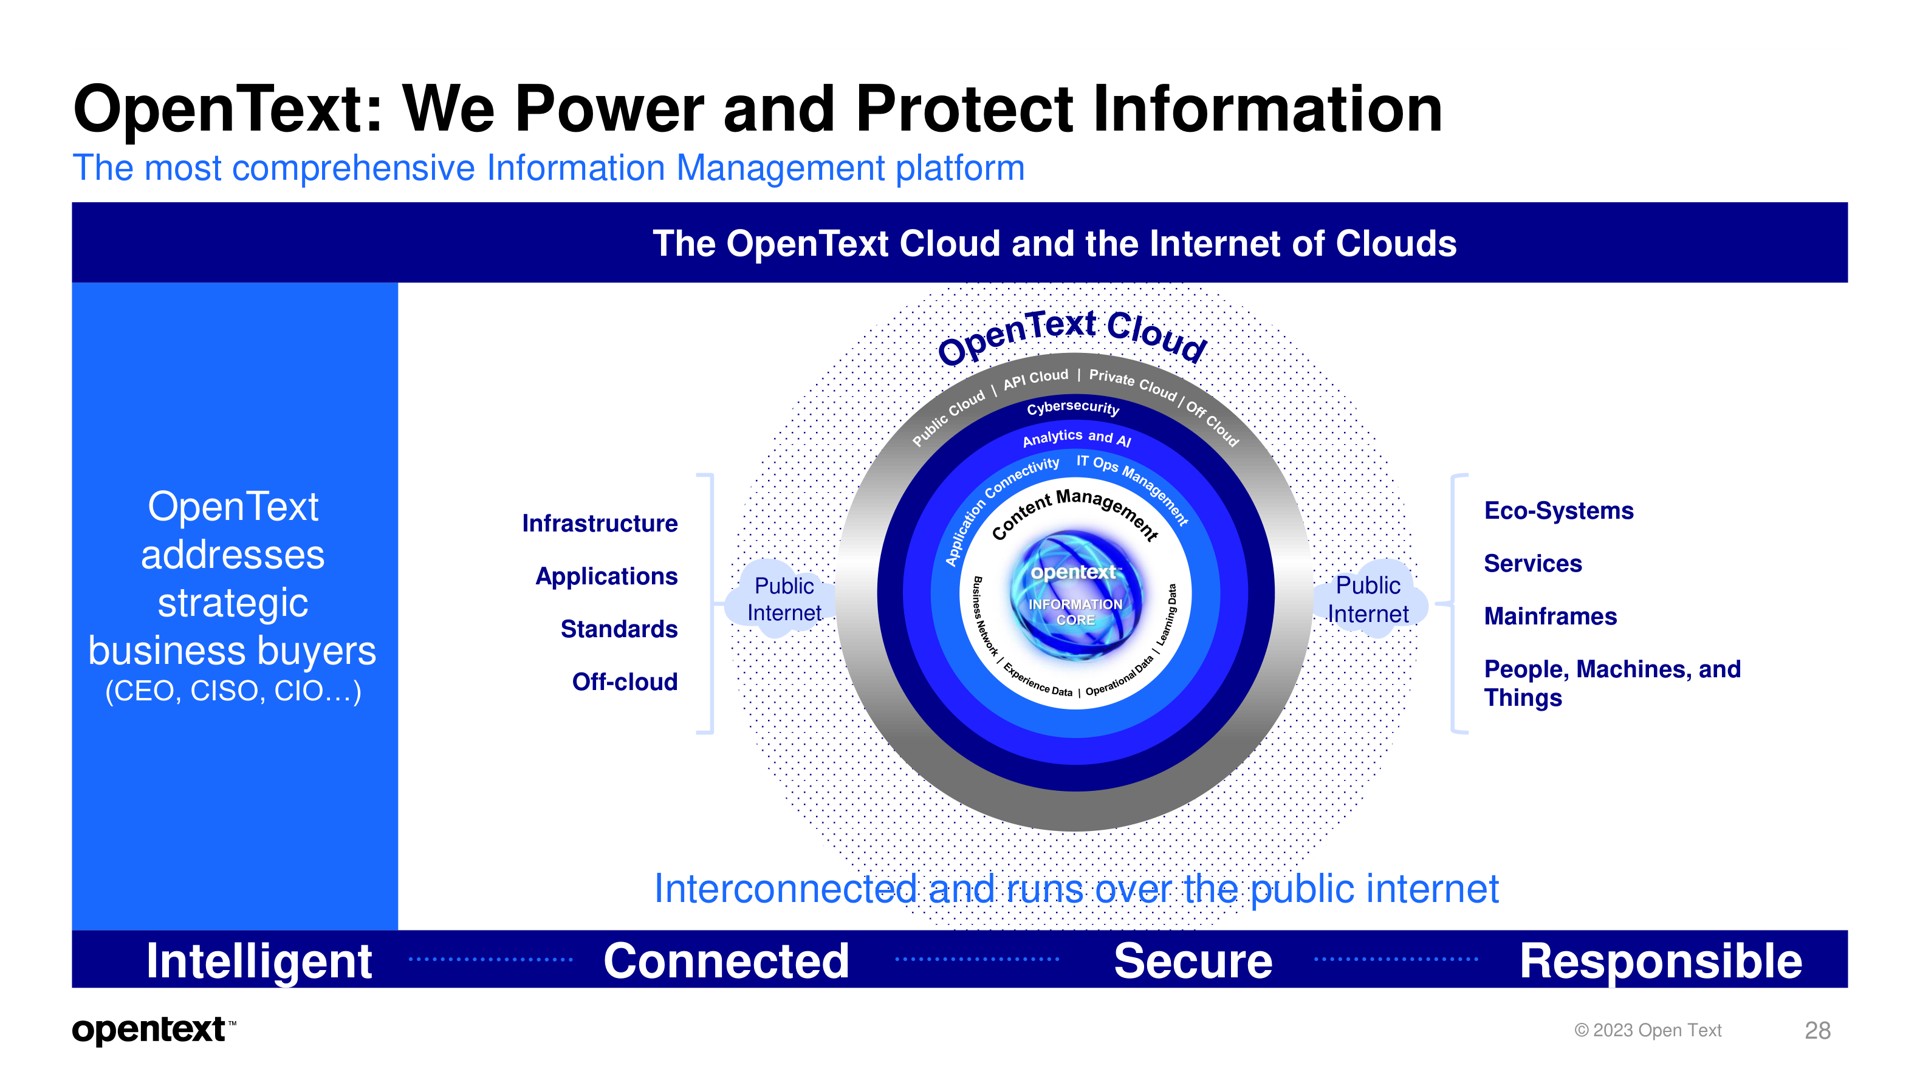 we power and protect information addresses strategic business buyers intelligent connected secure responsible interconnected and runs over the public off cloud | OpenText